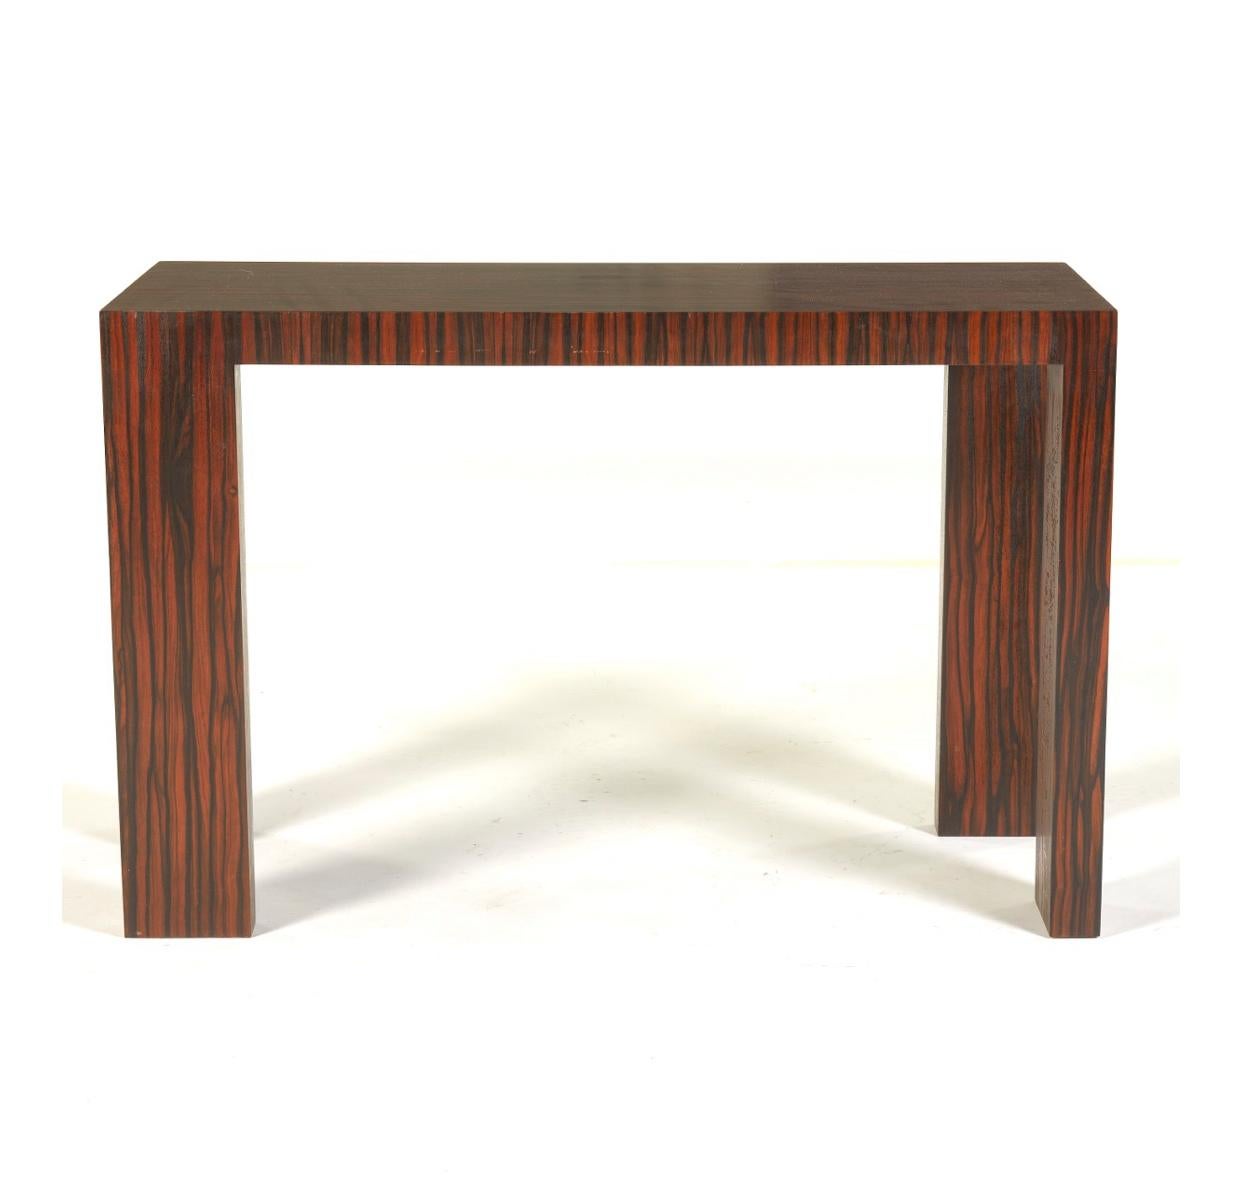 Bespoke designed and constructed by Brian Miller of Avalon, PA, are a set of three graduating console tables covered in Macassar ebony veneer, ca. 1990s. Macassar ebony veneer was a widely used wood of the Art Deco period. The legs are uncommon with